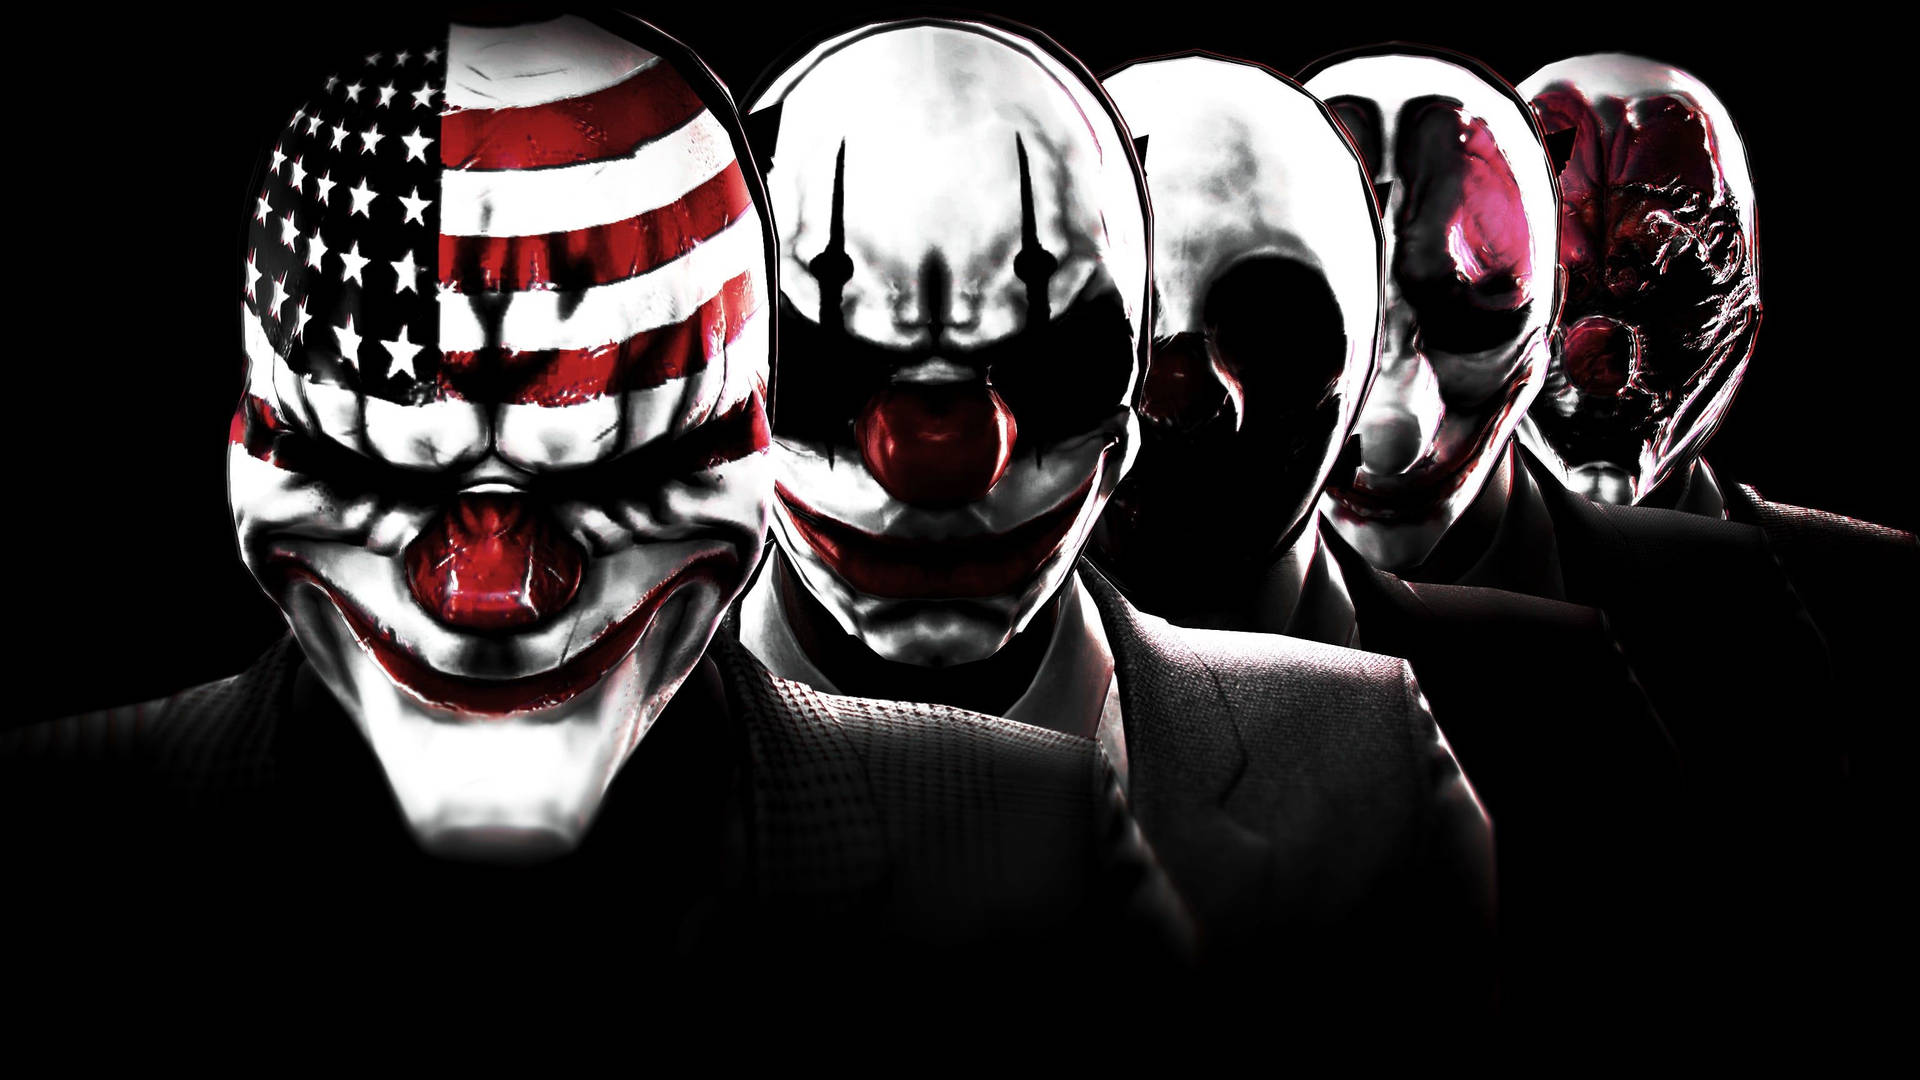 Video Game Payday 2 Five Scary Mask Wallpaper